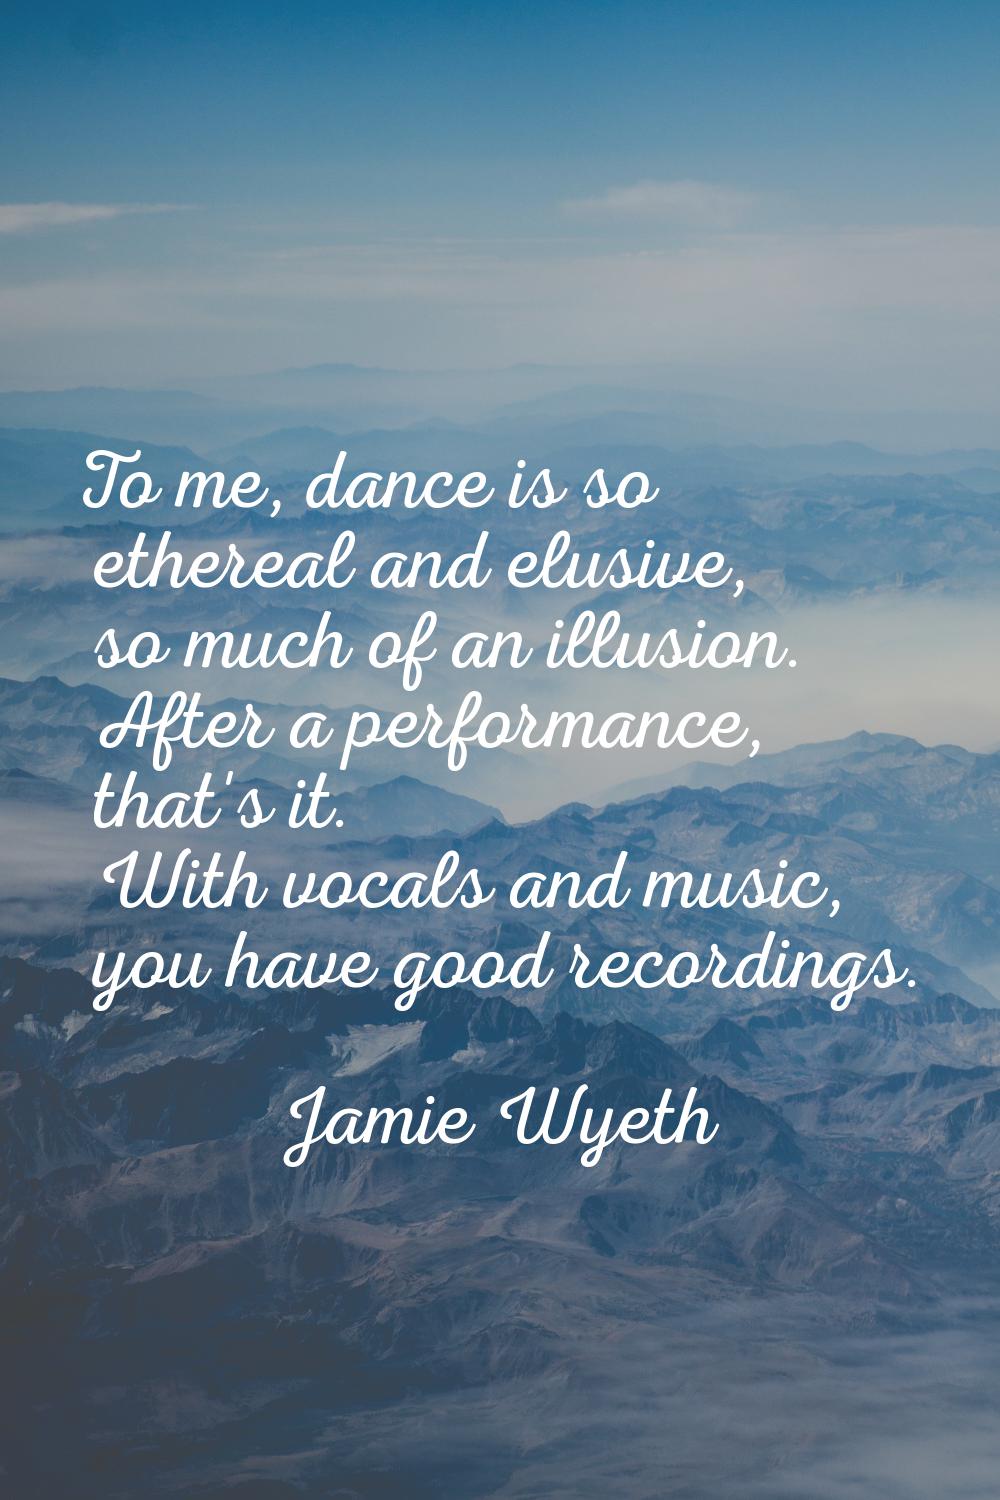 To me, dance is so ethereal and elusive, so much of an illusion. After a performance, that's it. Wi